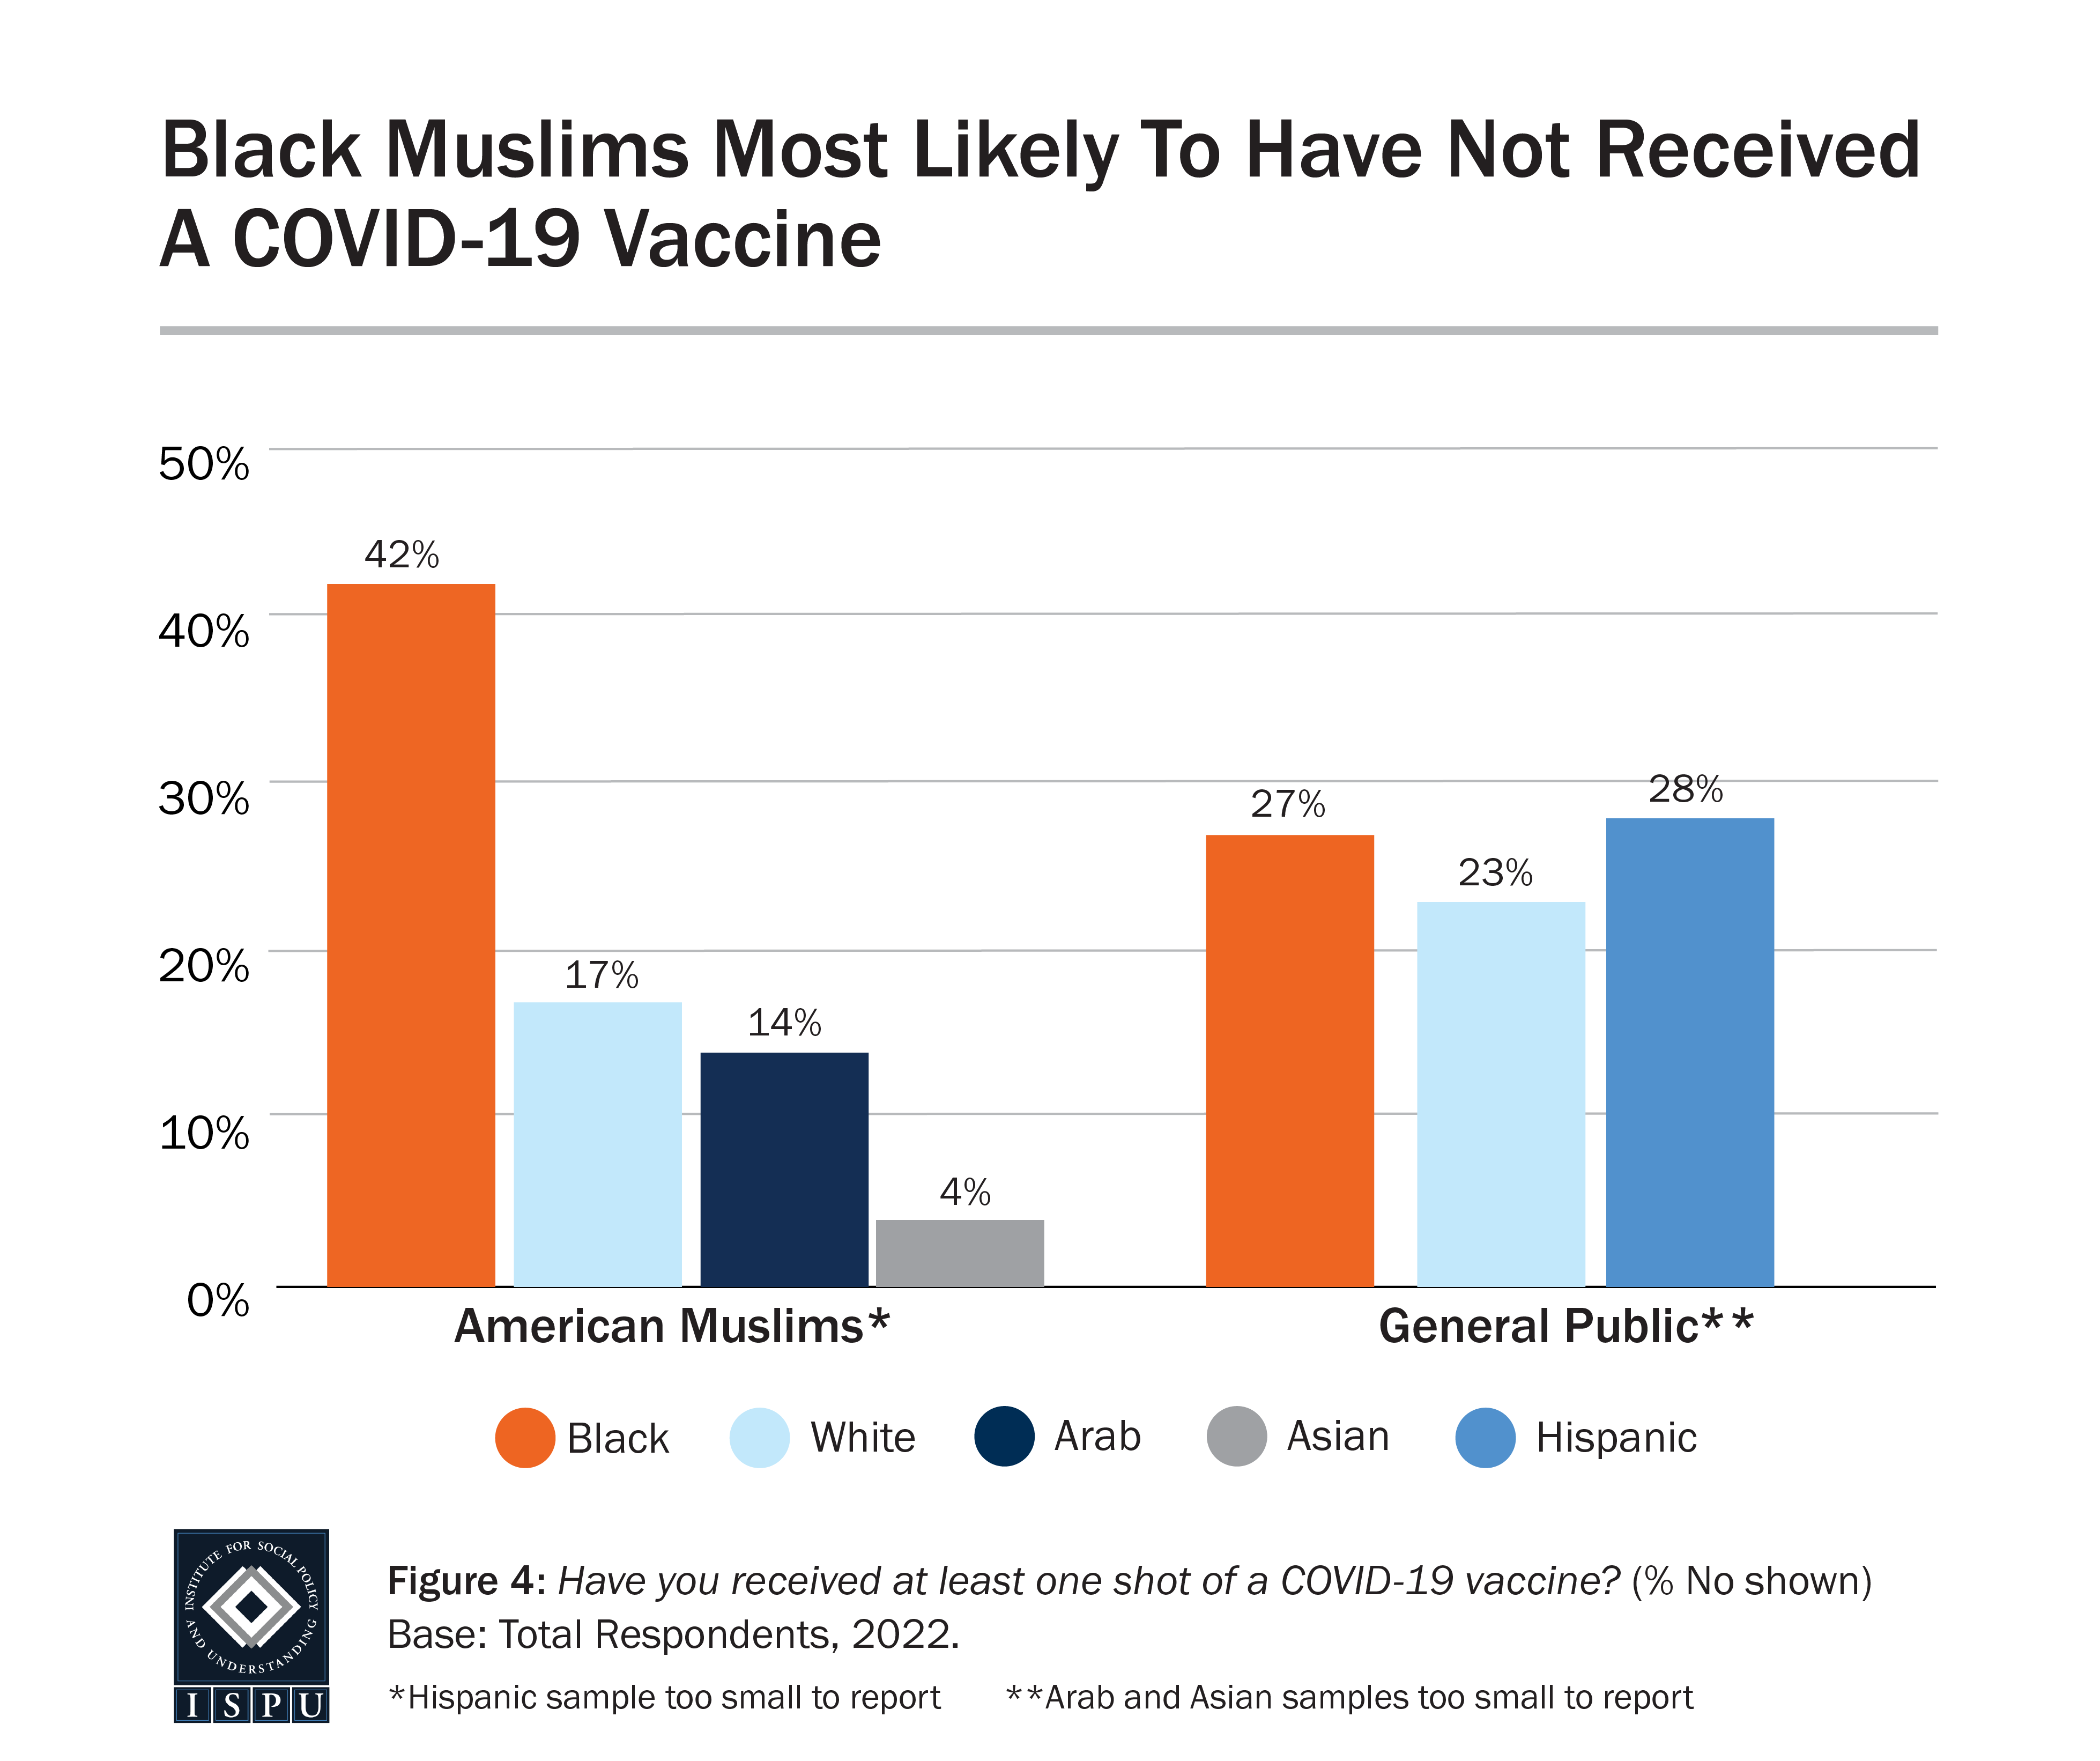 Bar graph showing Black Muslims are more likely to have not received a COVID-19 vaccine, compared to other Muslims and Black Americans in the general public.